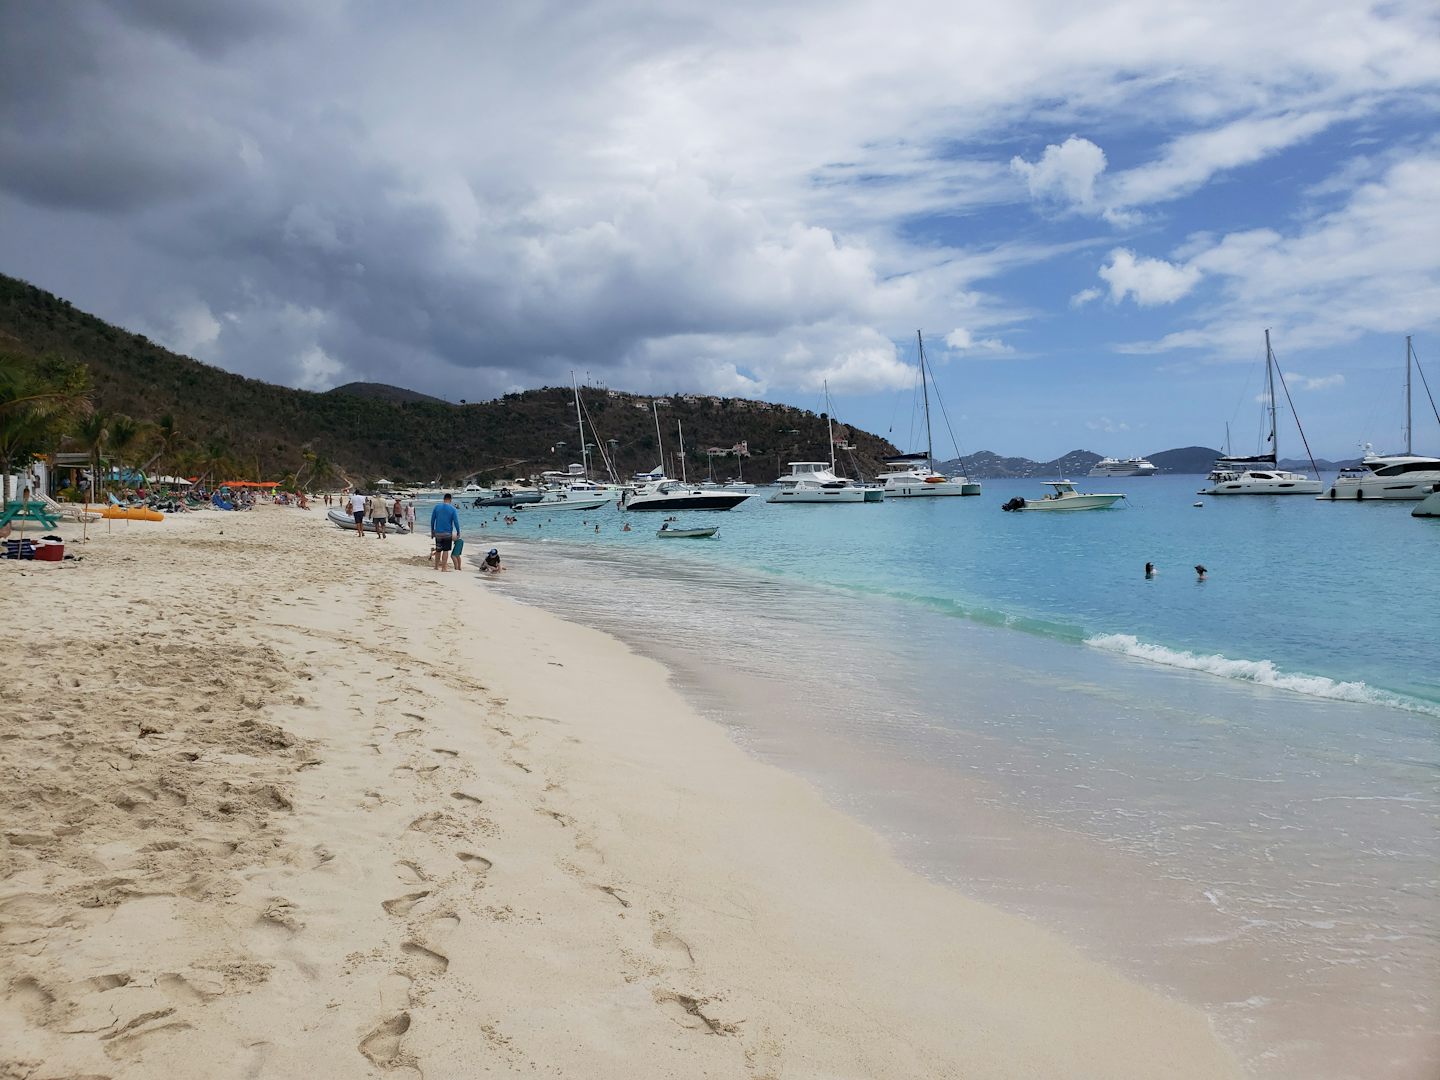 The beach in front of the Soggy Dollar on Jost Van Dyke.